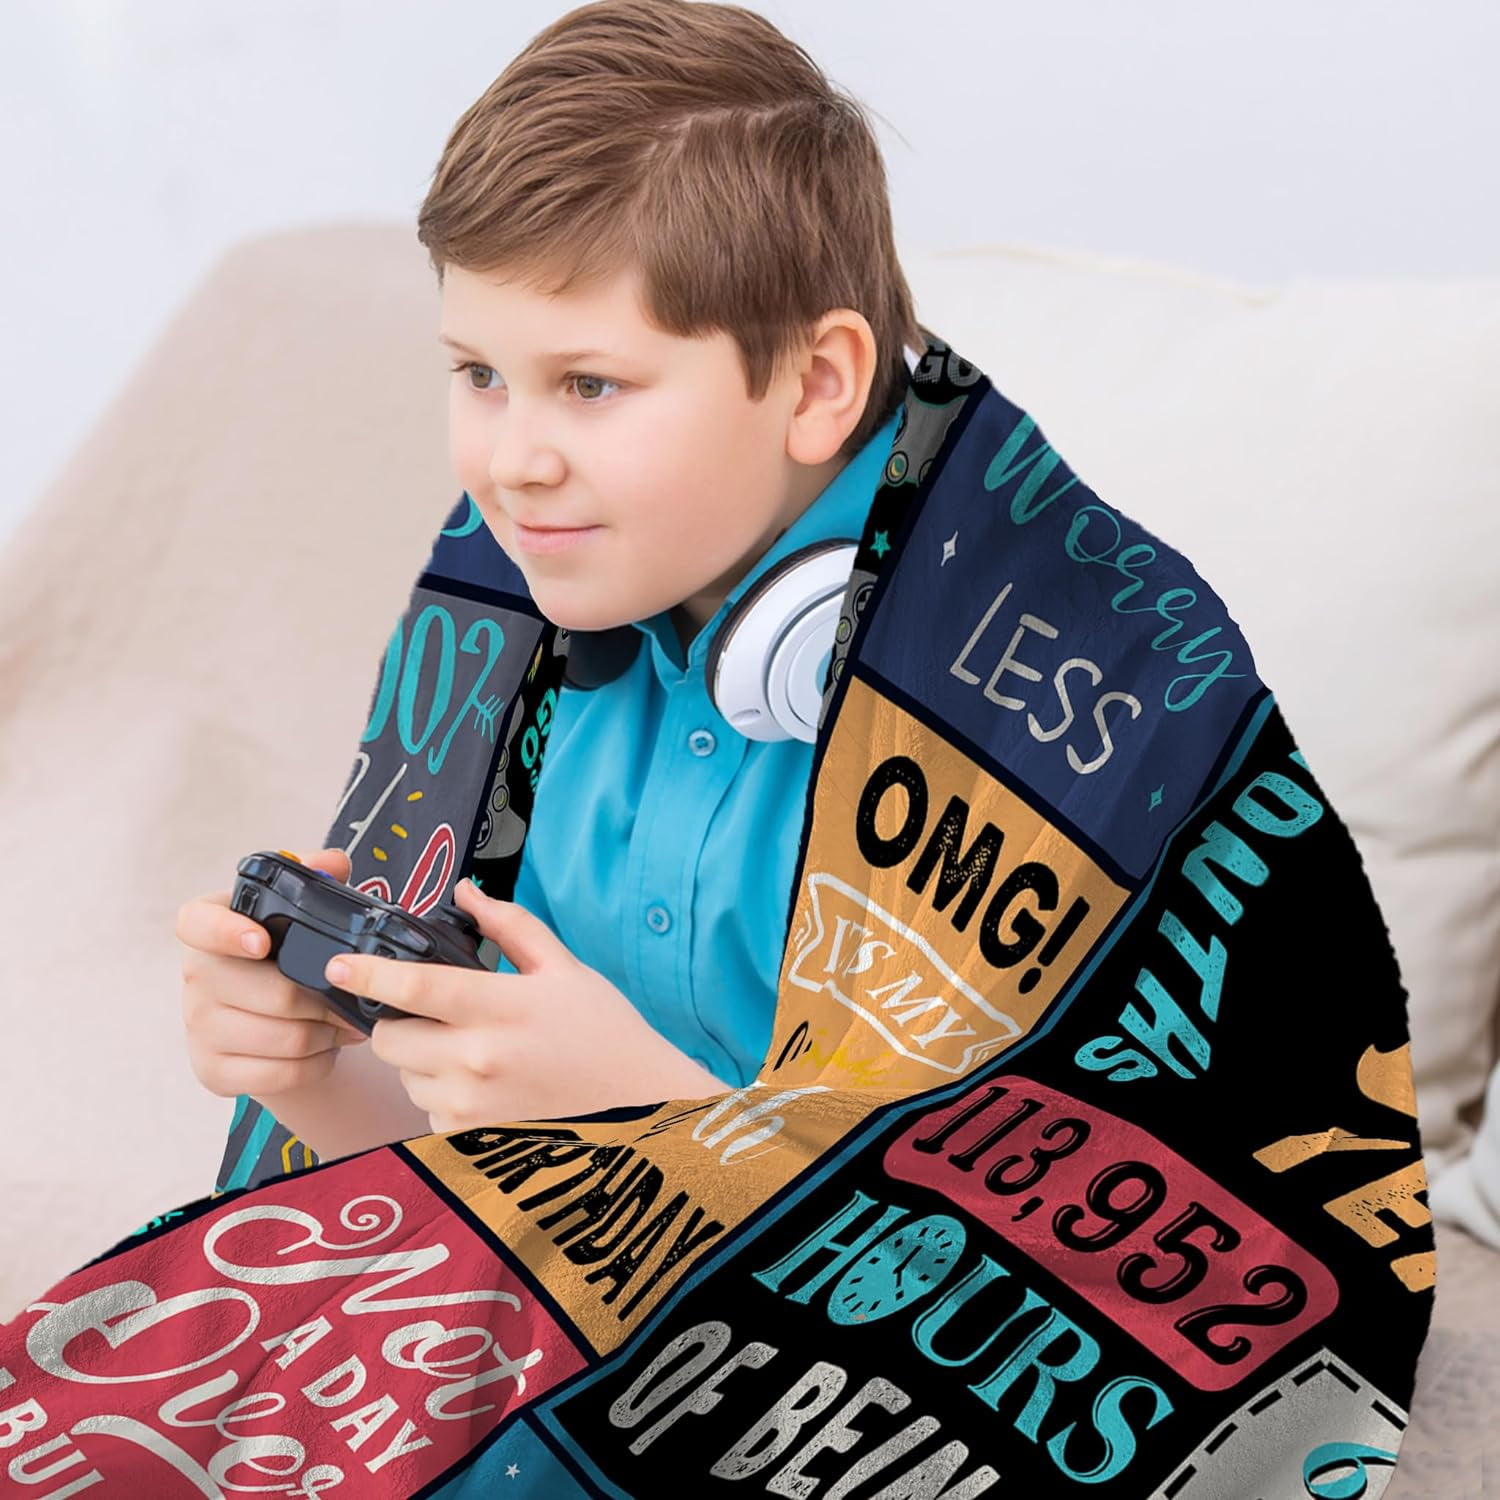 10 Year Old Boy Gifts: 40 Toys Boys Will Love - arinsolangeathome